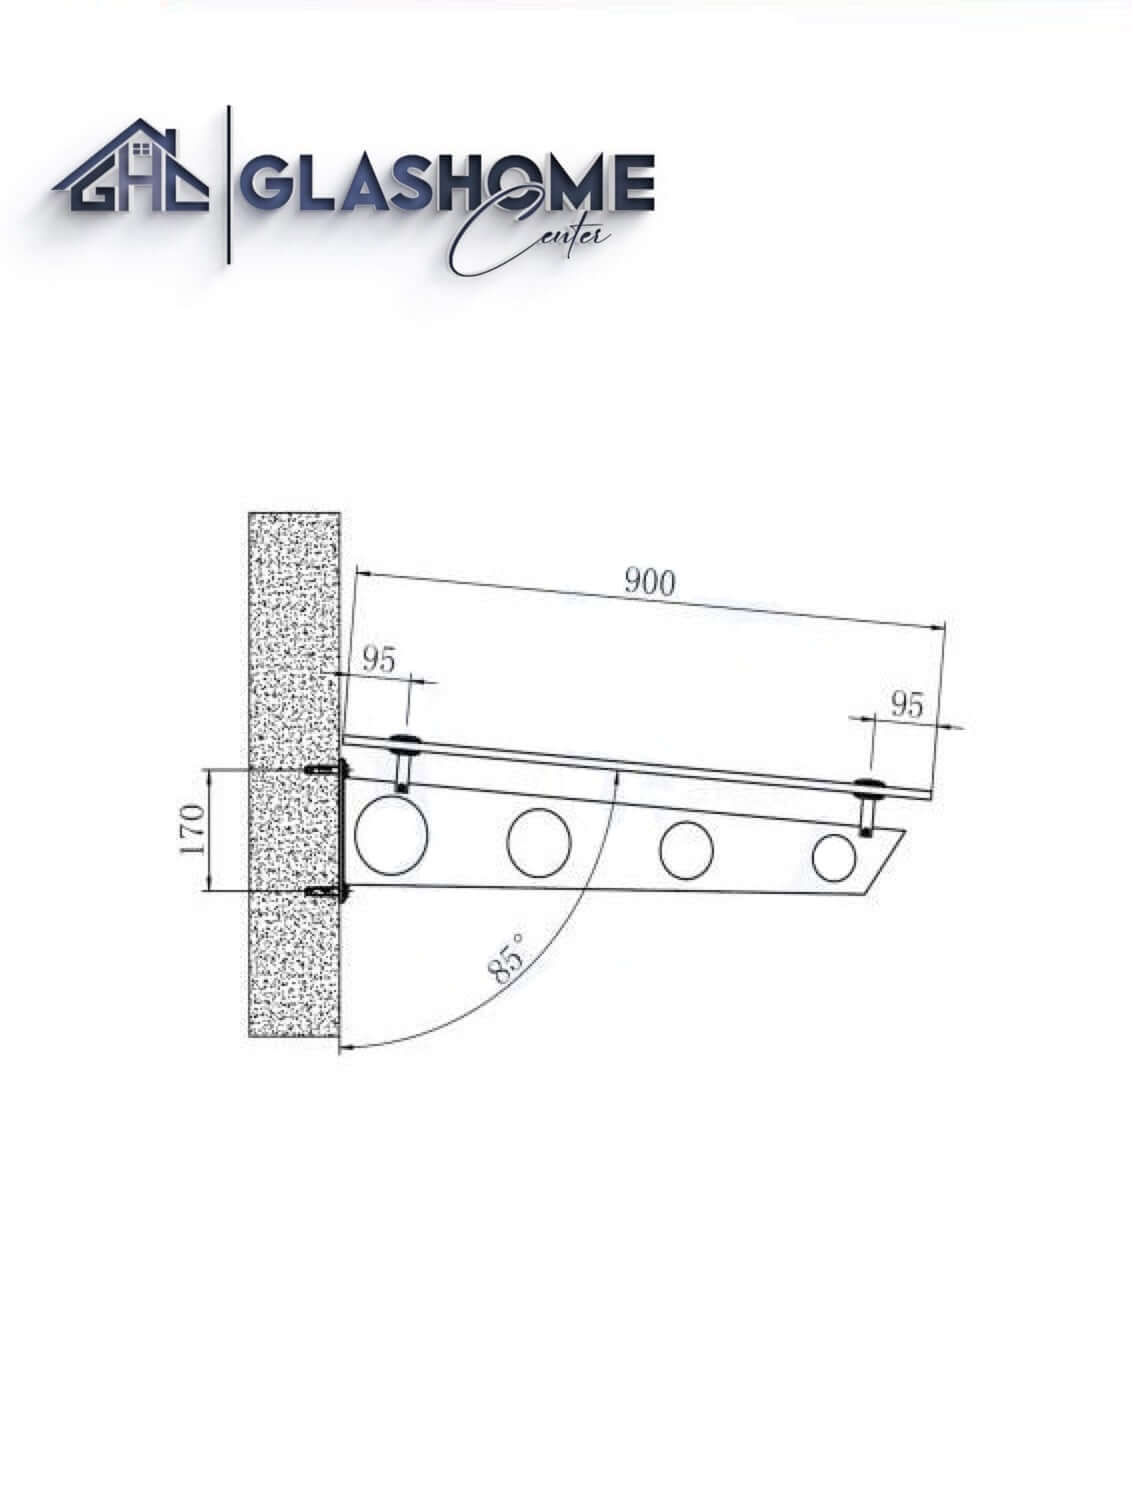 GlasHomeCenter - glass canopy - gray glass - 200x90cm - 13.1mm laminated safety glass - incl. 2 stainless steel brackets variant "Stockholm"